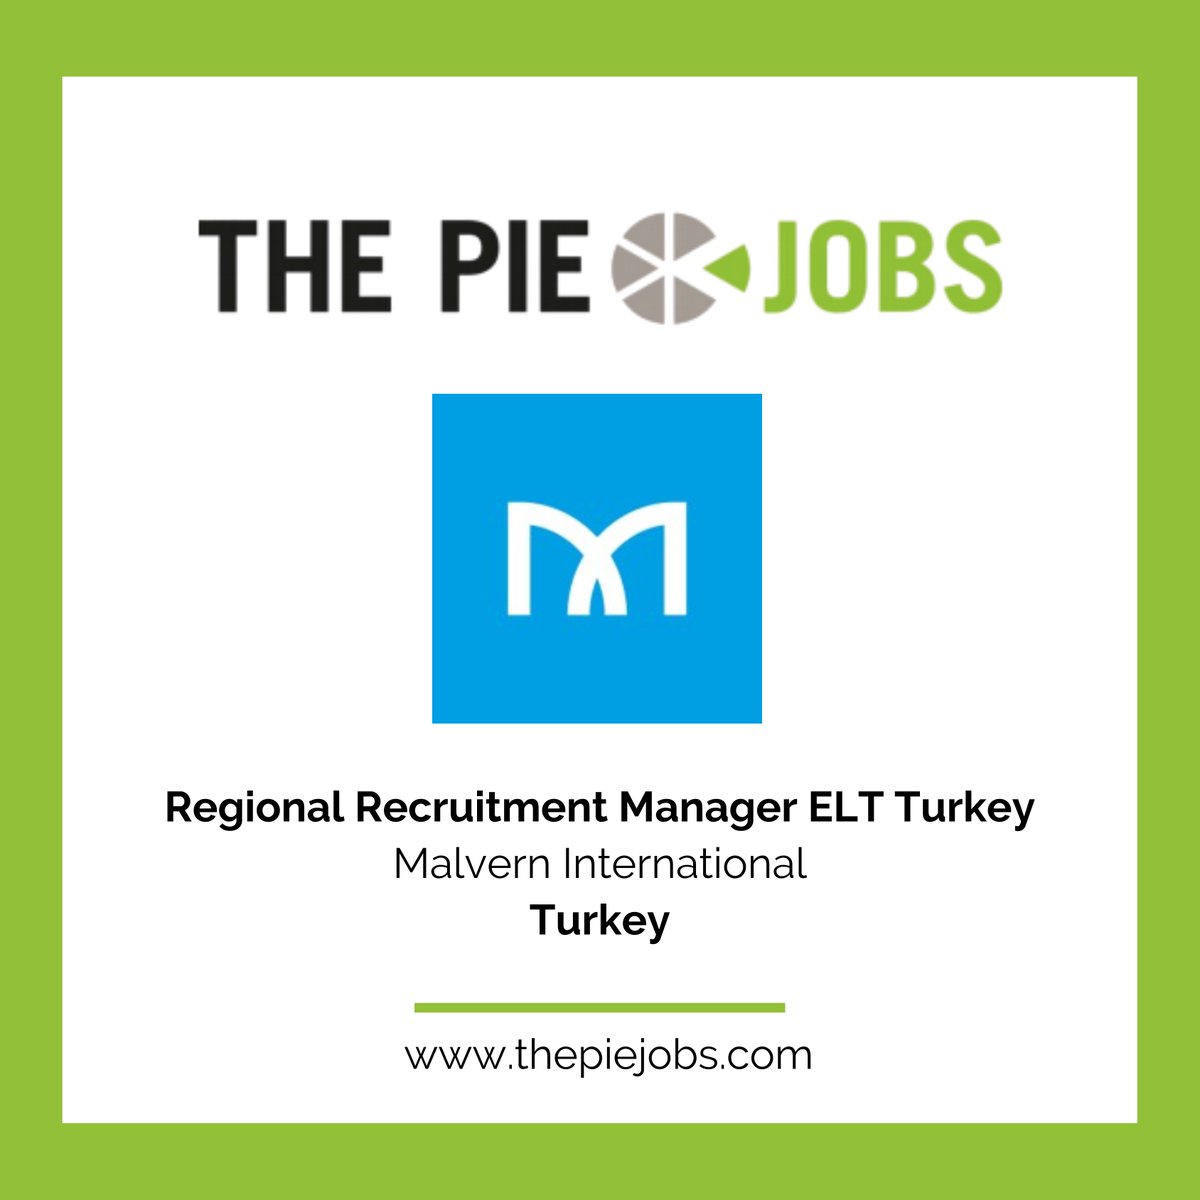 Malvern International is #hiring! The Regional Recruitment #Manager ELT Turkey will drive and deliver annual sales plans for each target source market. Apply at The PIE Jobs: hubs.ly/Q02wljyH0 #newjob #Turkey #recruitment #sales #intled